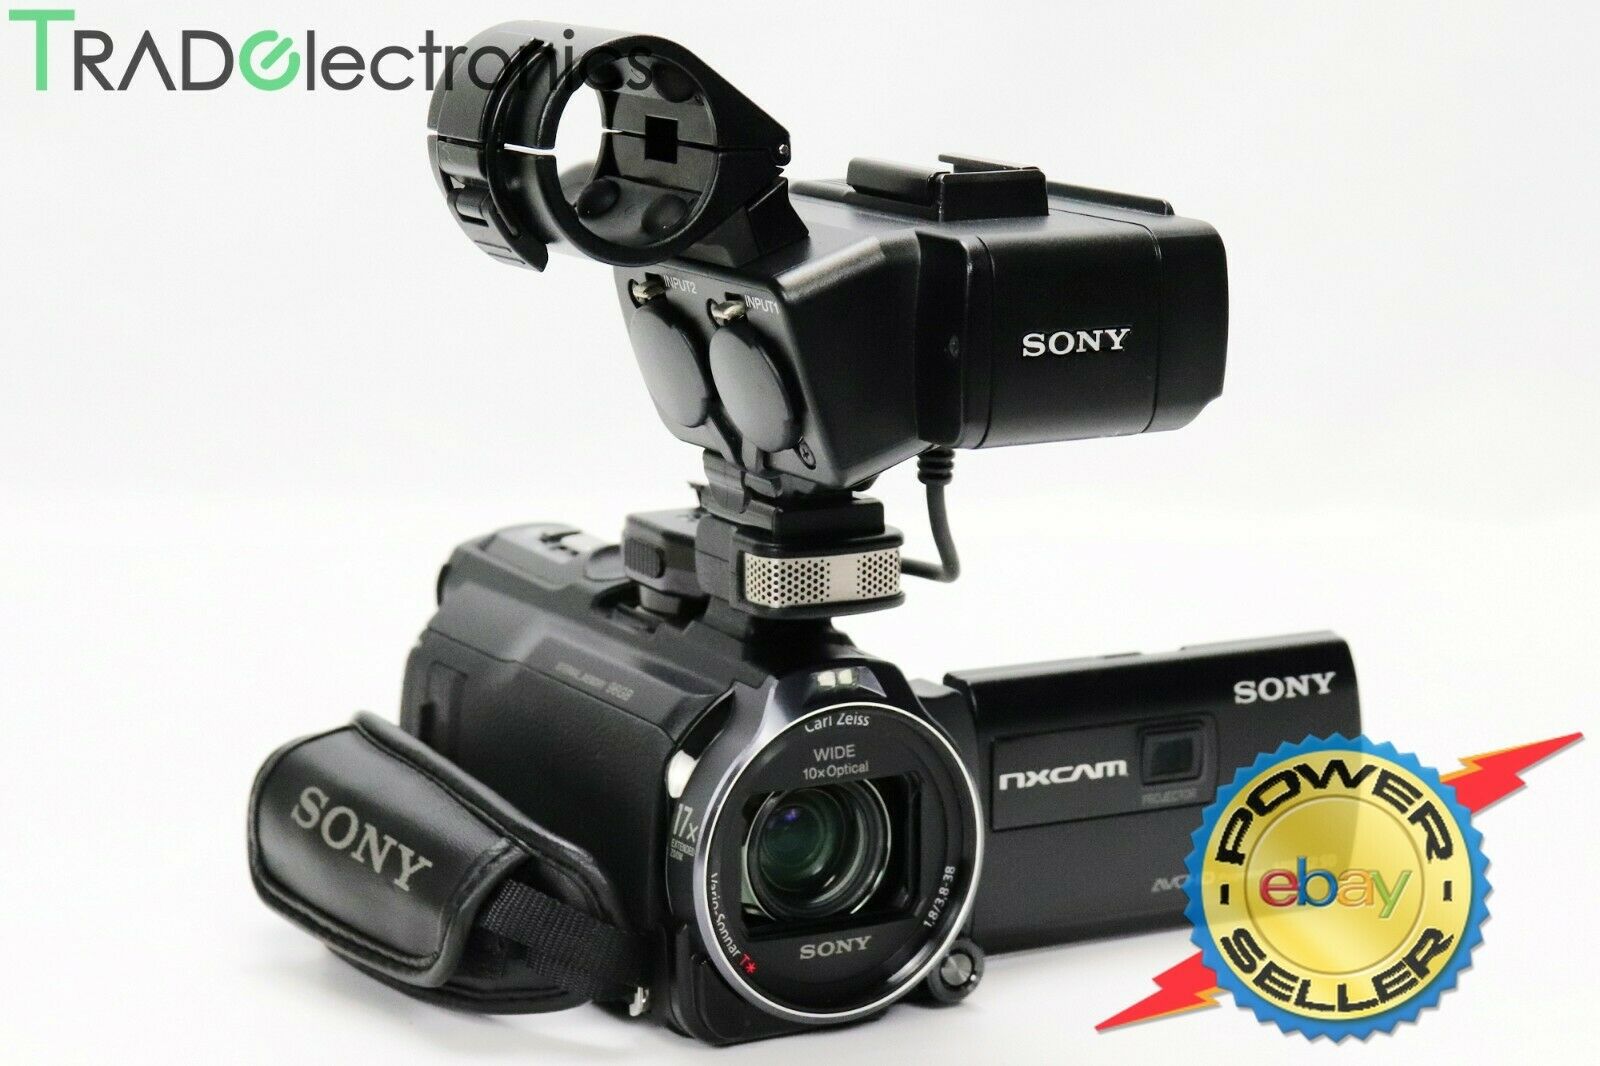 Sony NXCAM HXR NX30 FHD Video Camera Preowned Tradelectronics